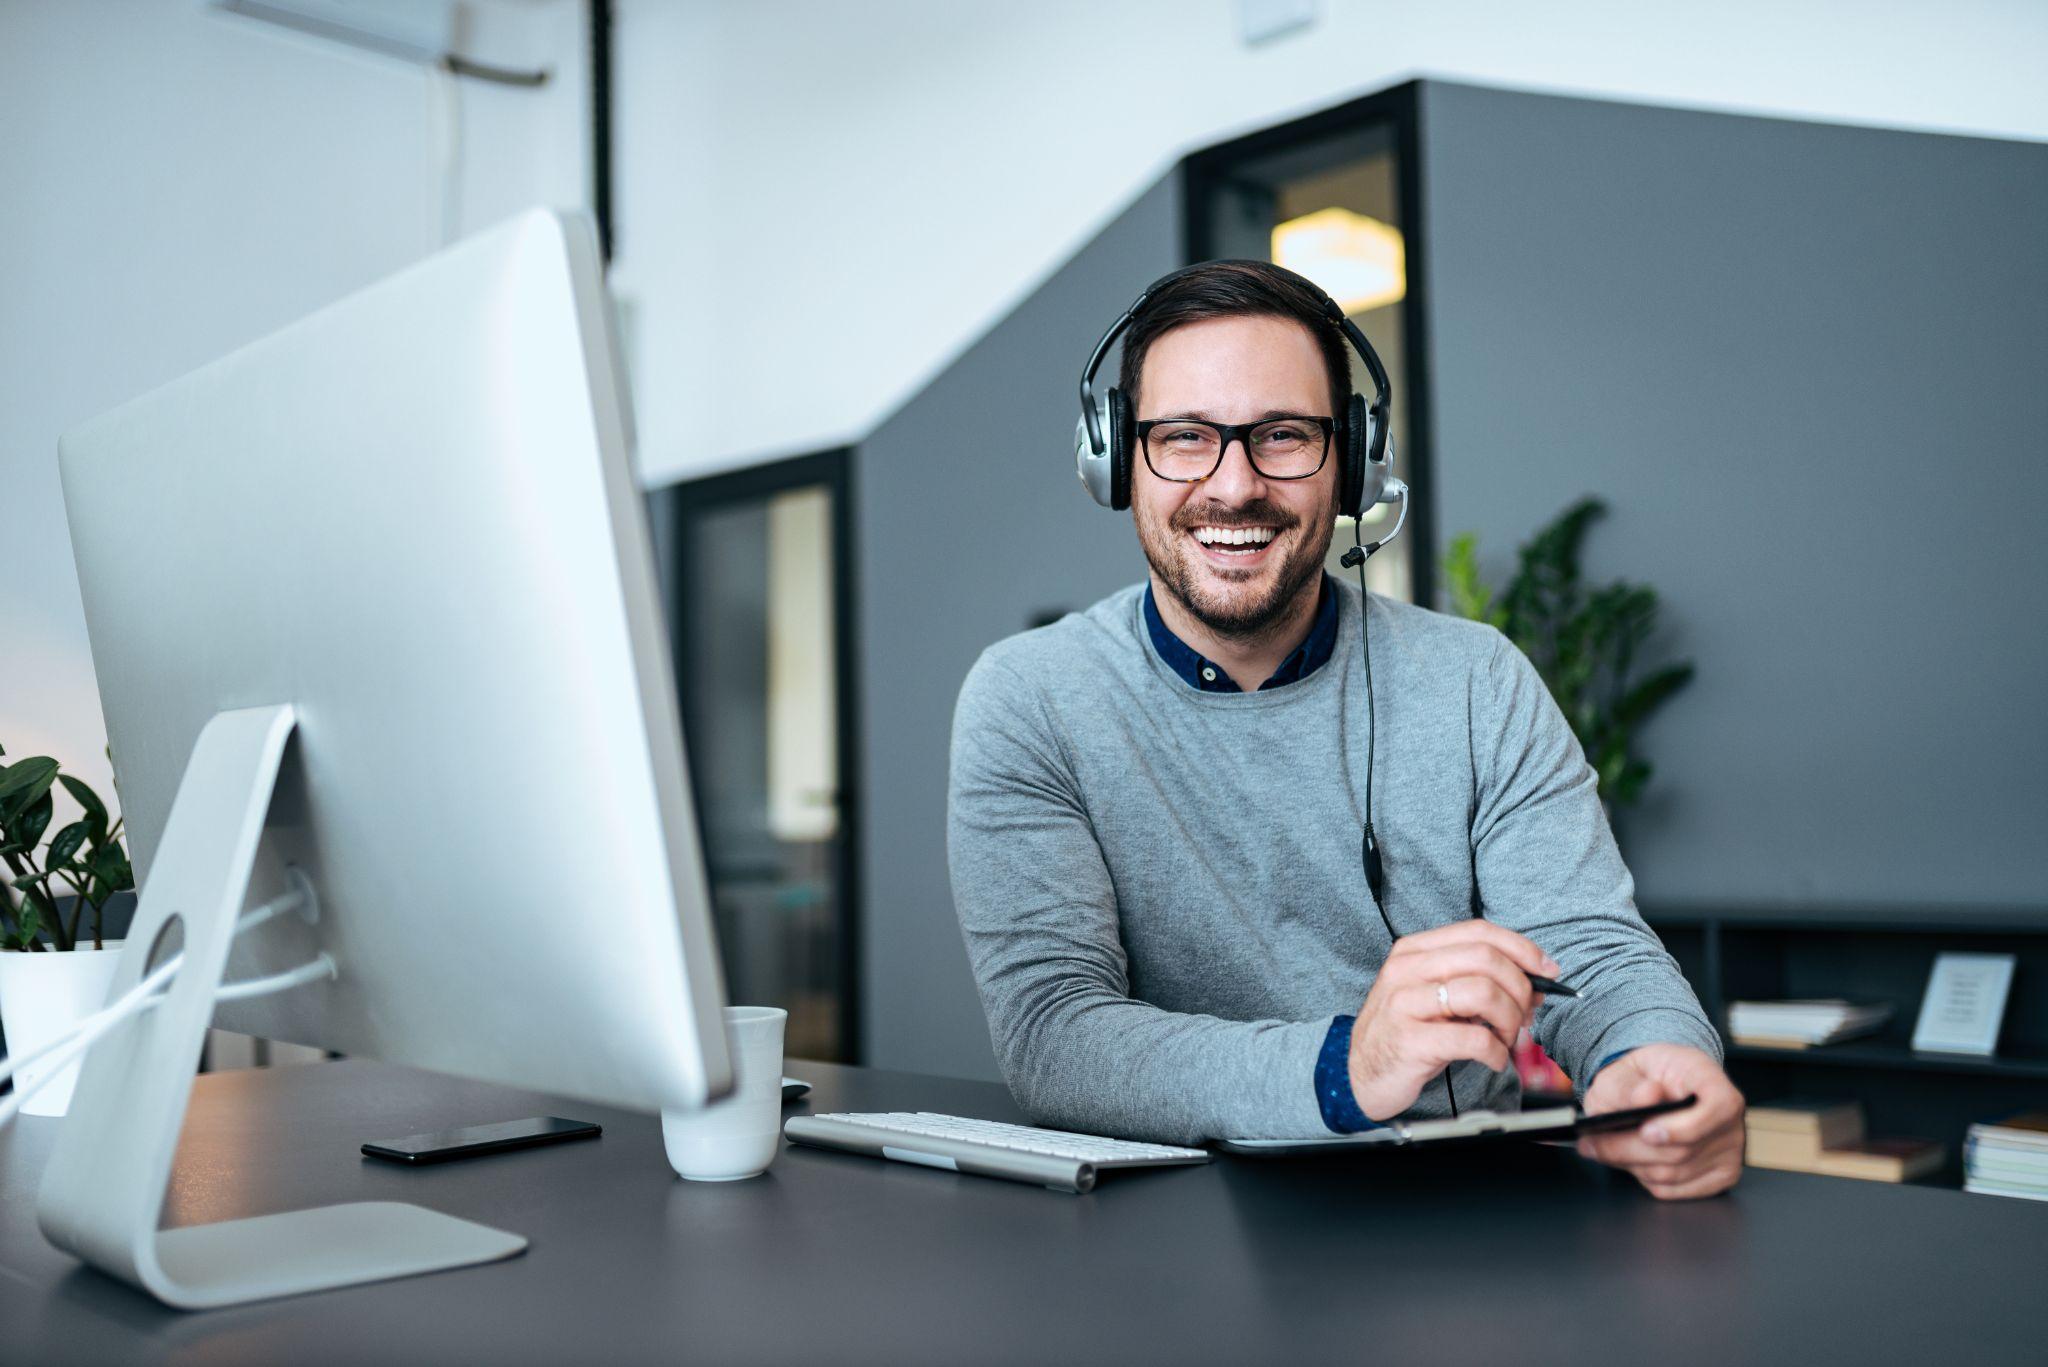 Why You Should Consider Outsourcing Live Phone Answering Services